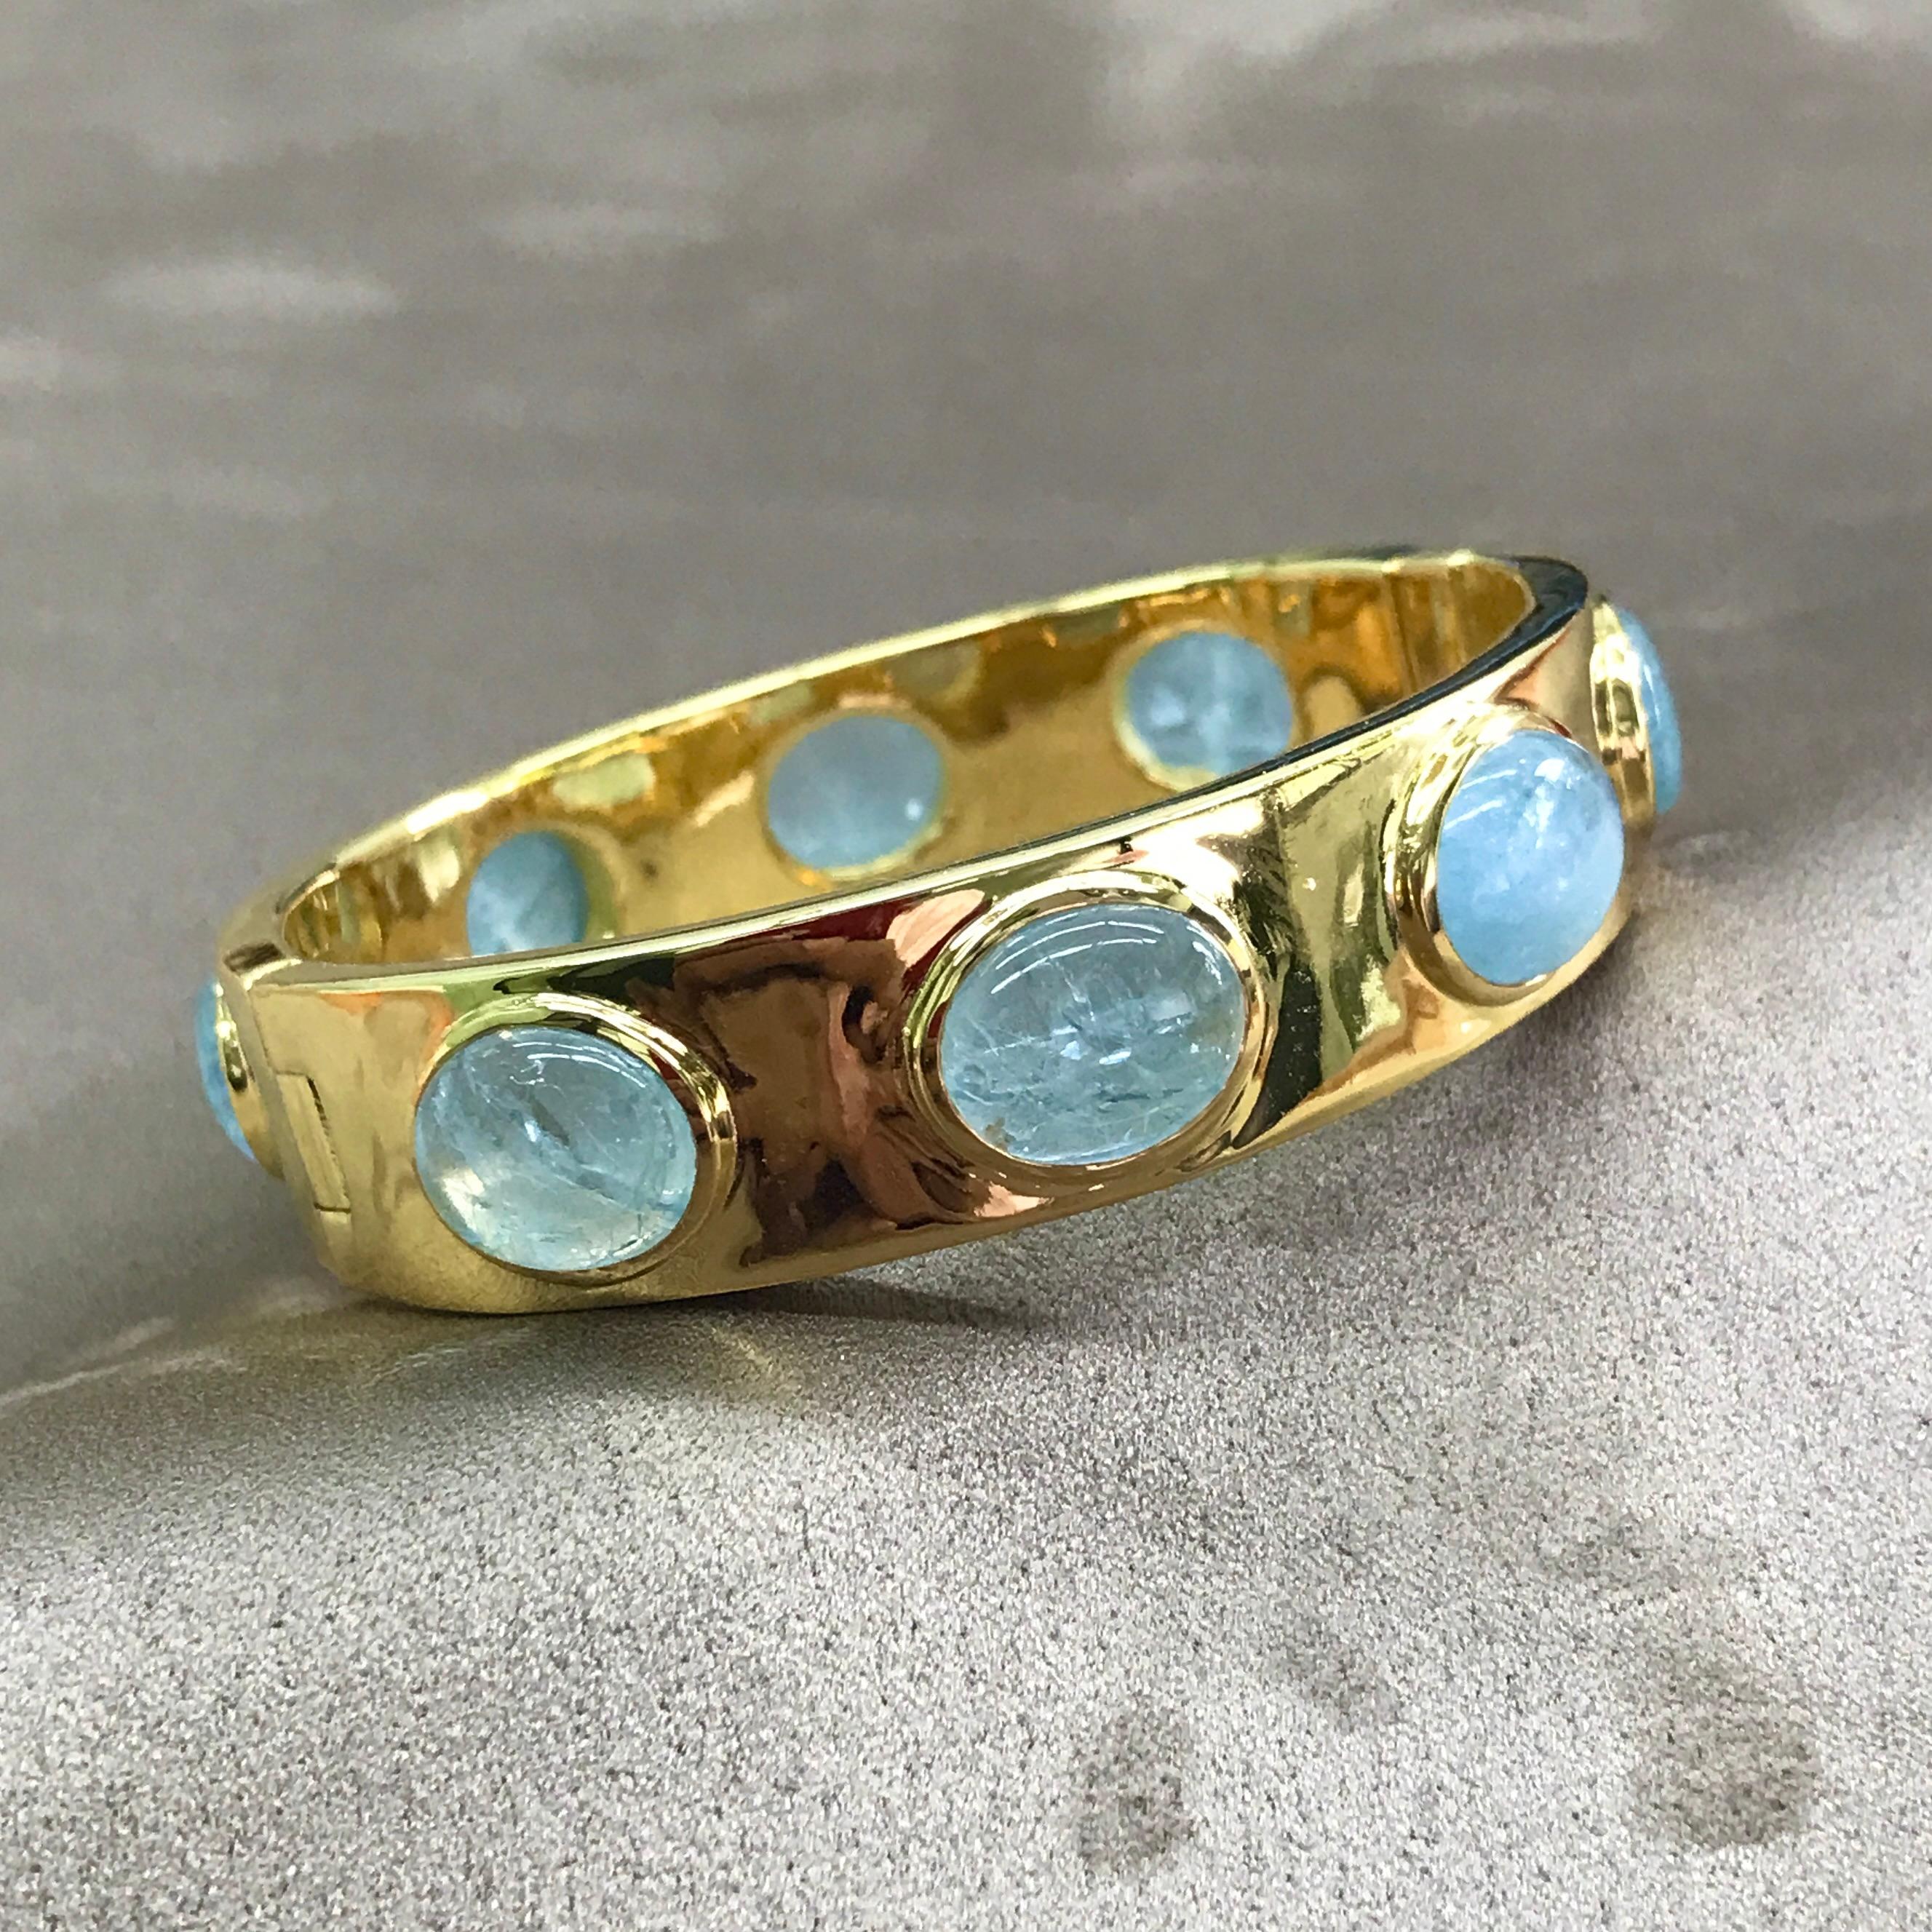 An extremely stylish, substantial and elegant hinged cuff, bezel set with 8 cabochon Aquamarine of nice colour.  We love the proportions of this cuff - discreet enough to be worn everyday, yet striking enough to be noticed in any surrounding. 

The